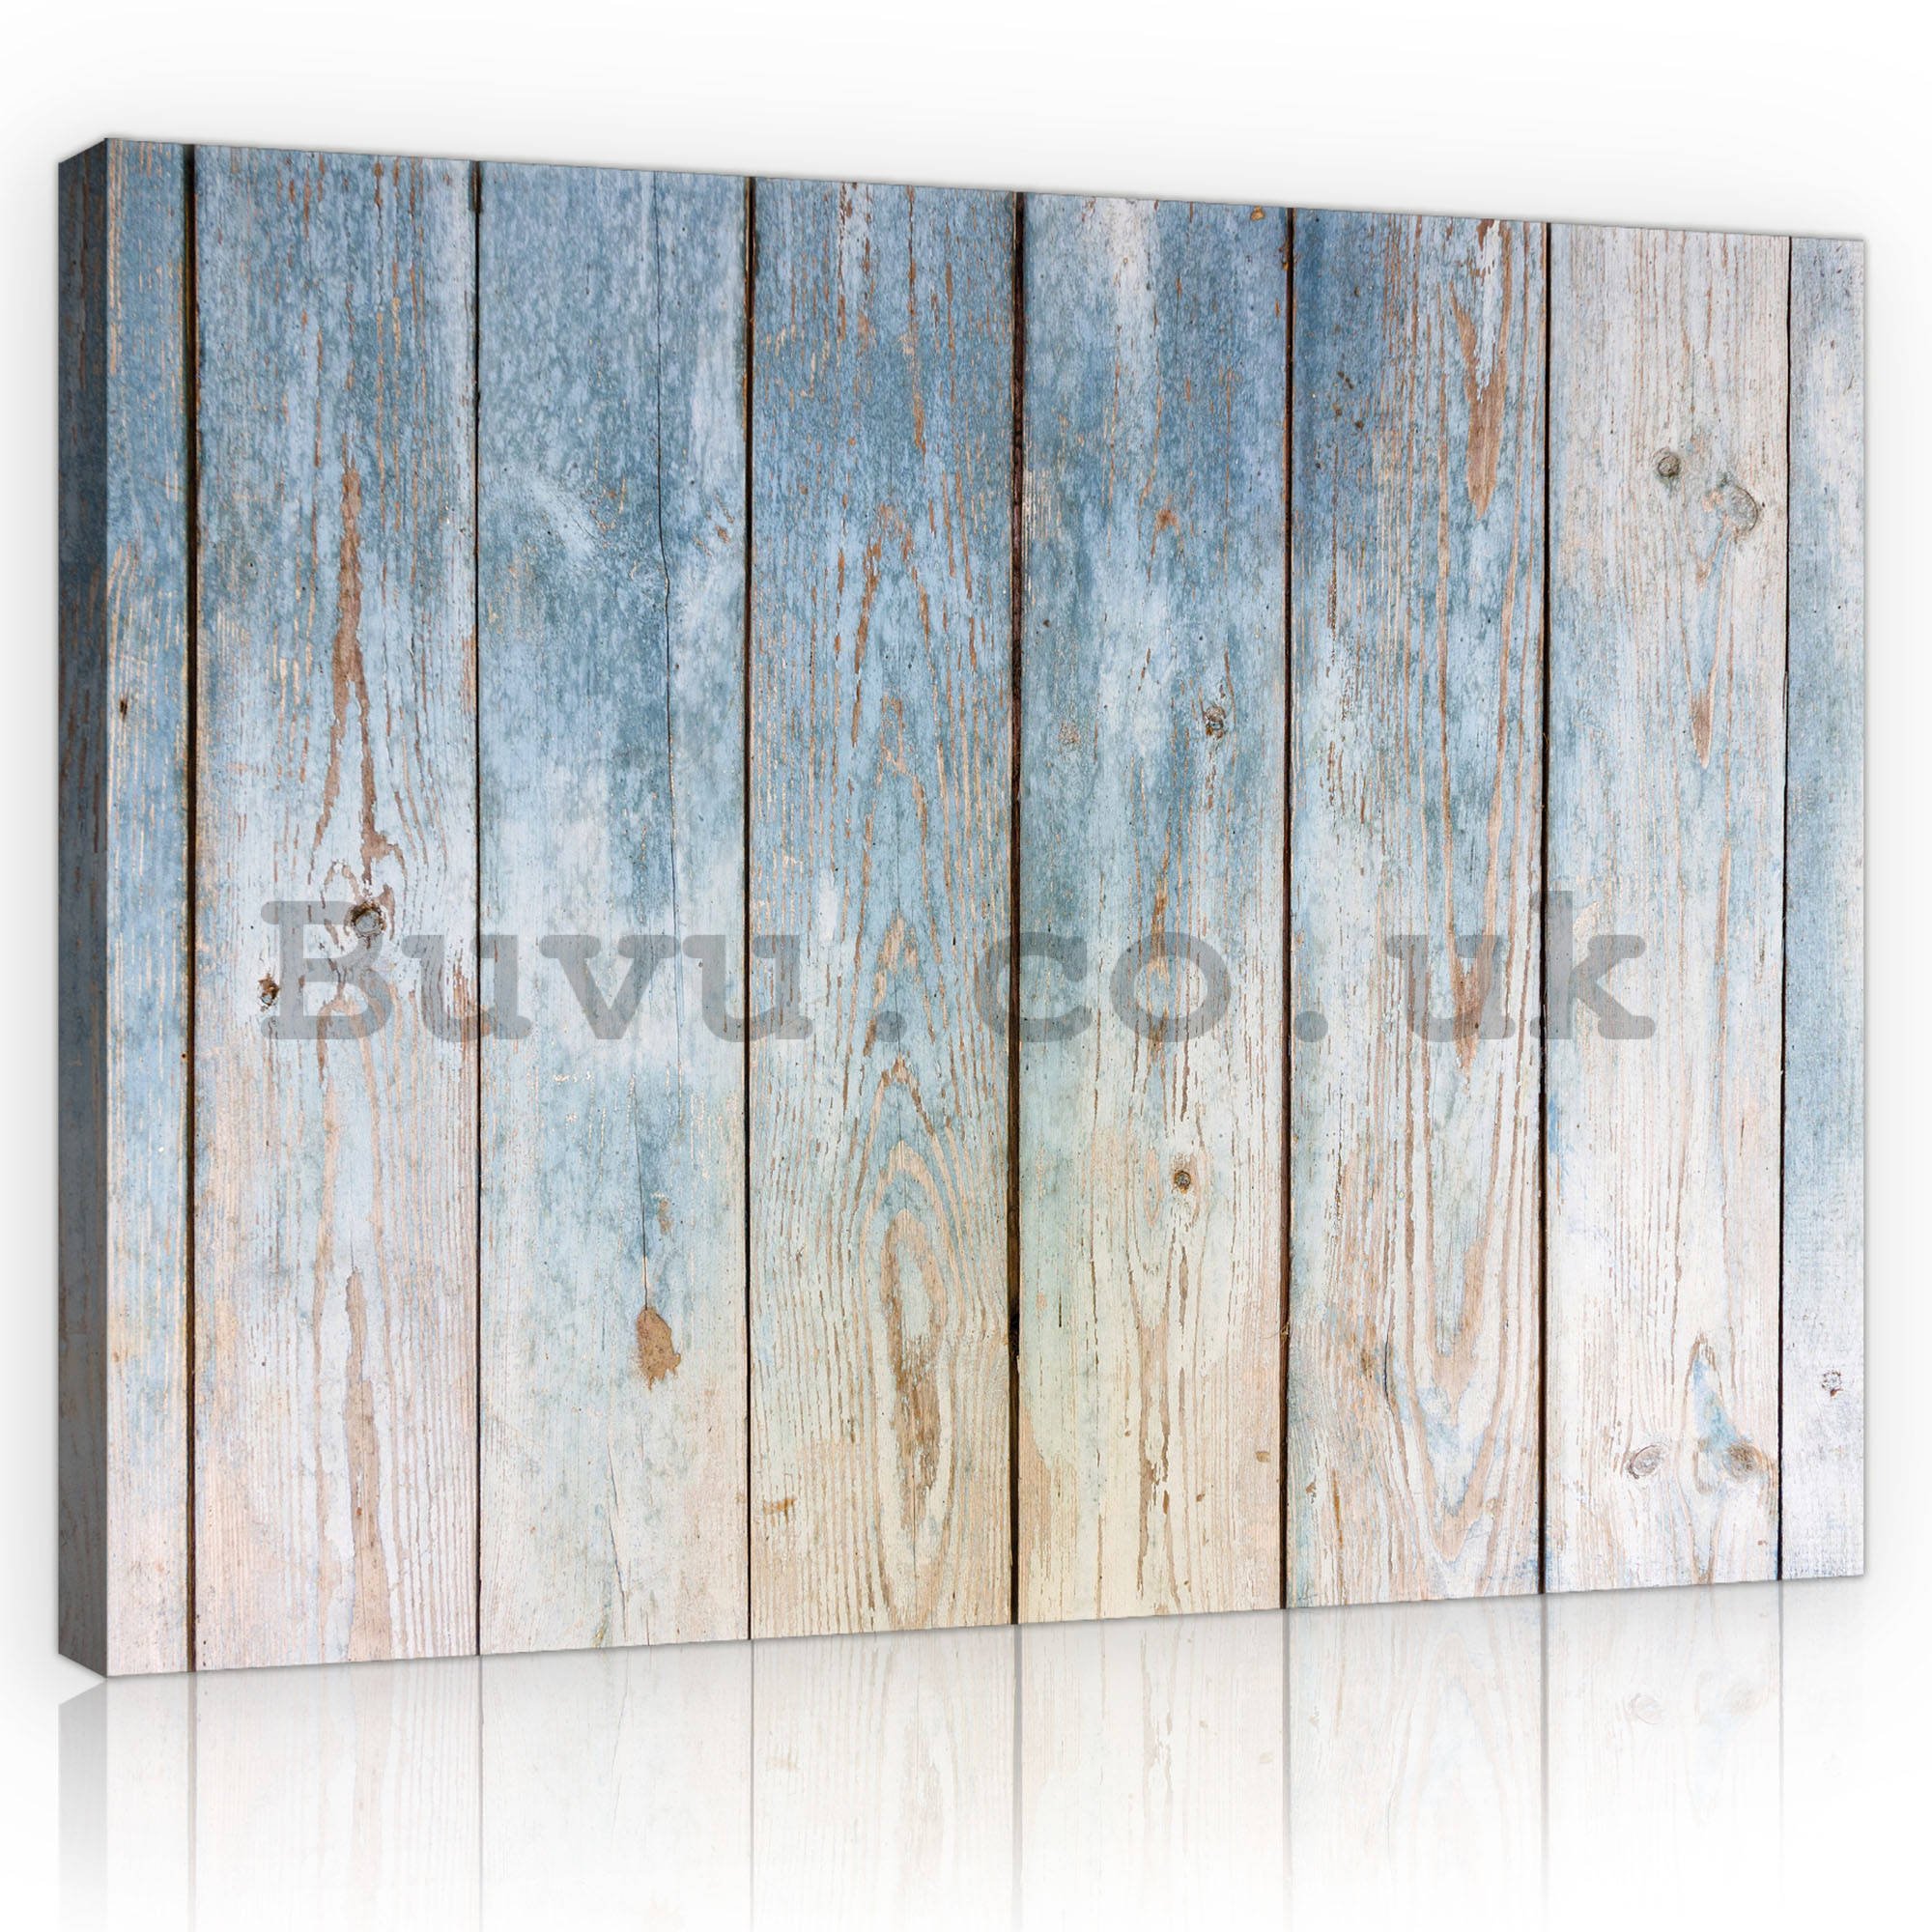 Painting on canvas: Wooden partitions (5) - 75x100 cm